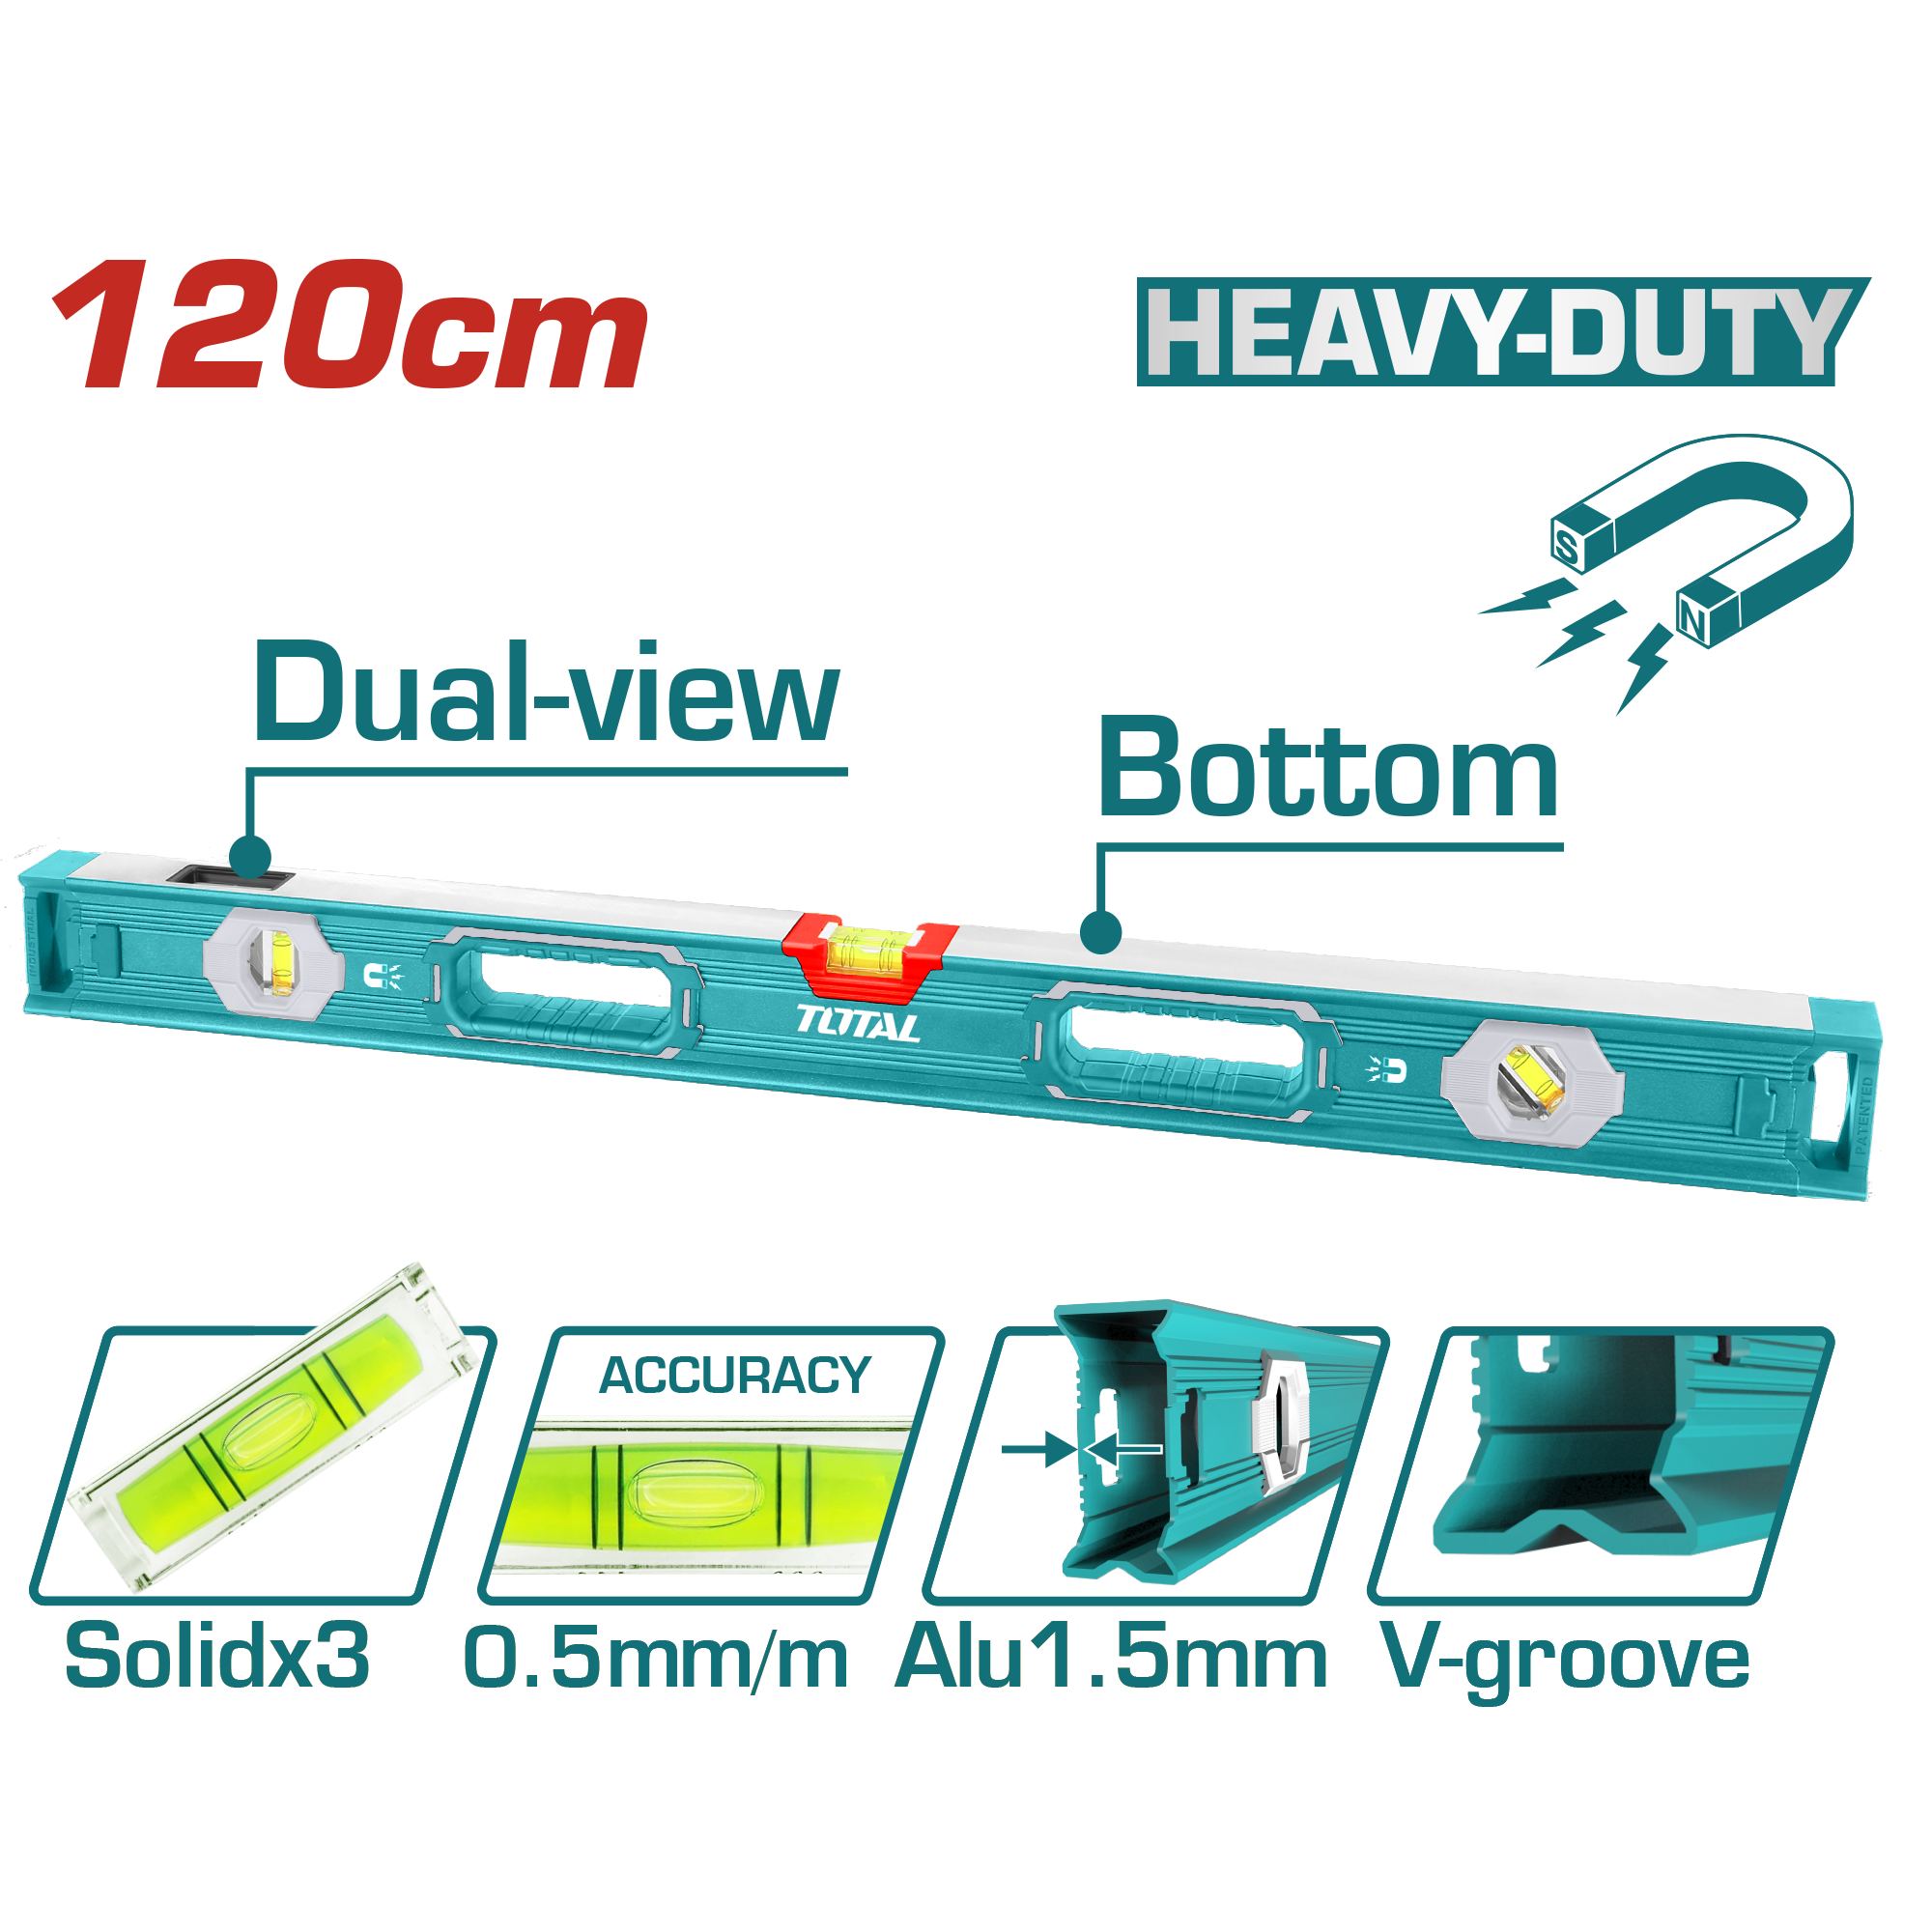 48" Heavy Duty Spirit level(With powerful magnets)